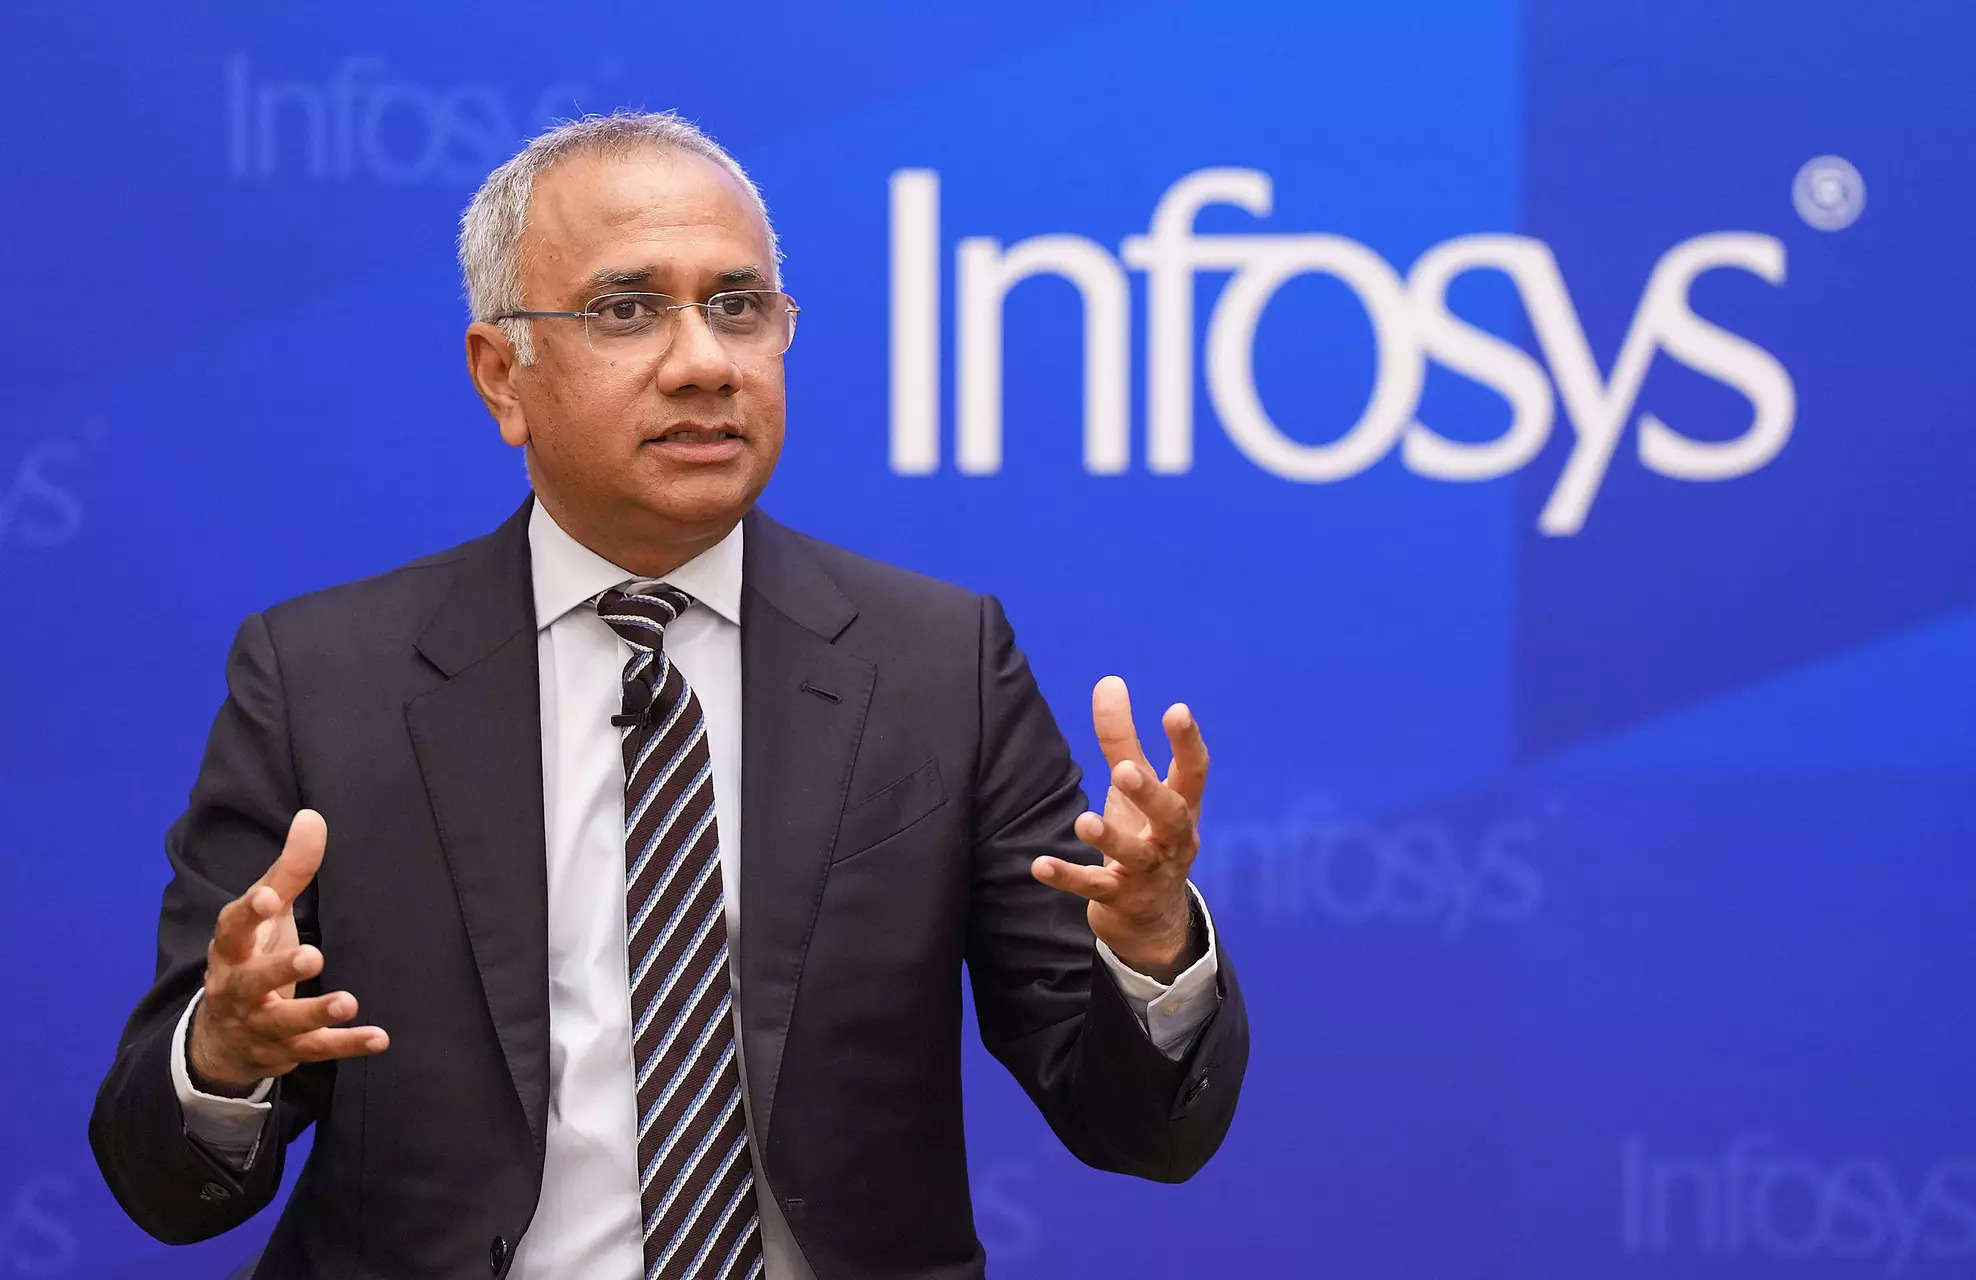 Infosys CEO Salil Parekh speaks during the announcement of